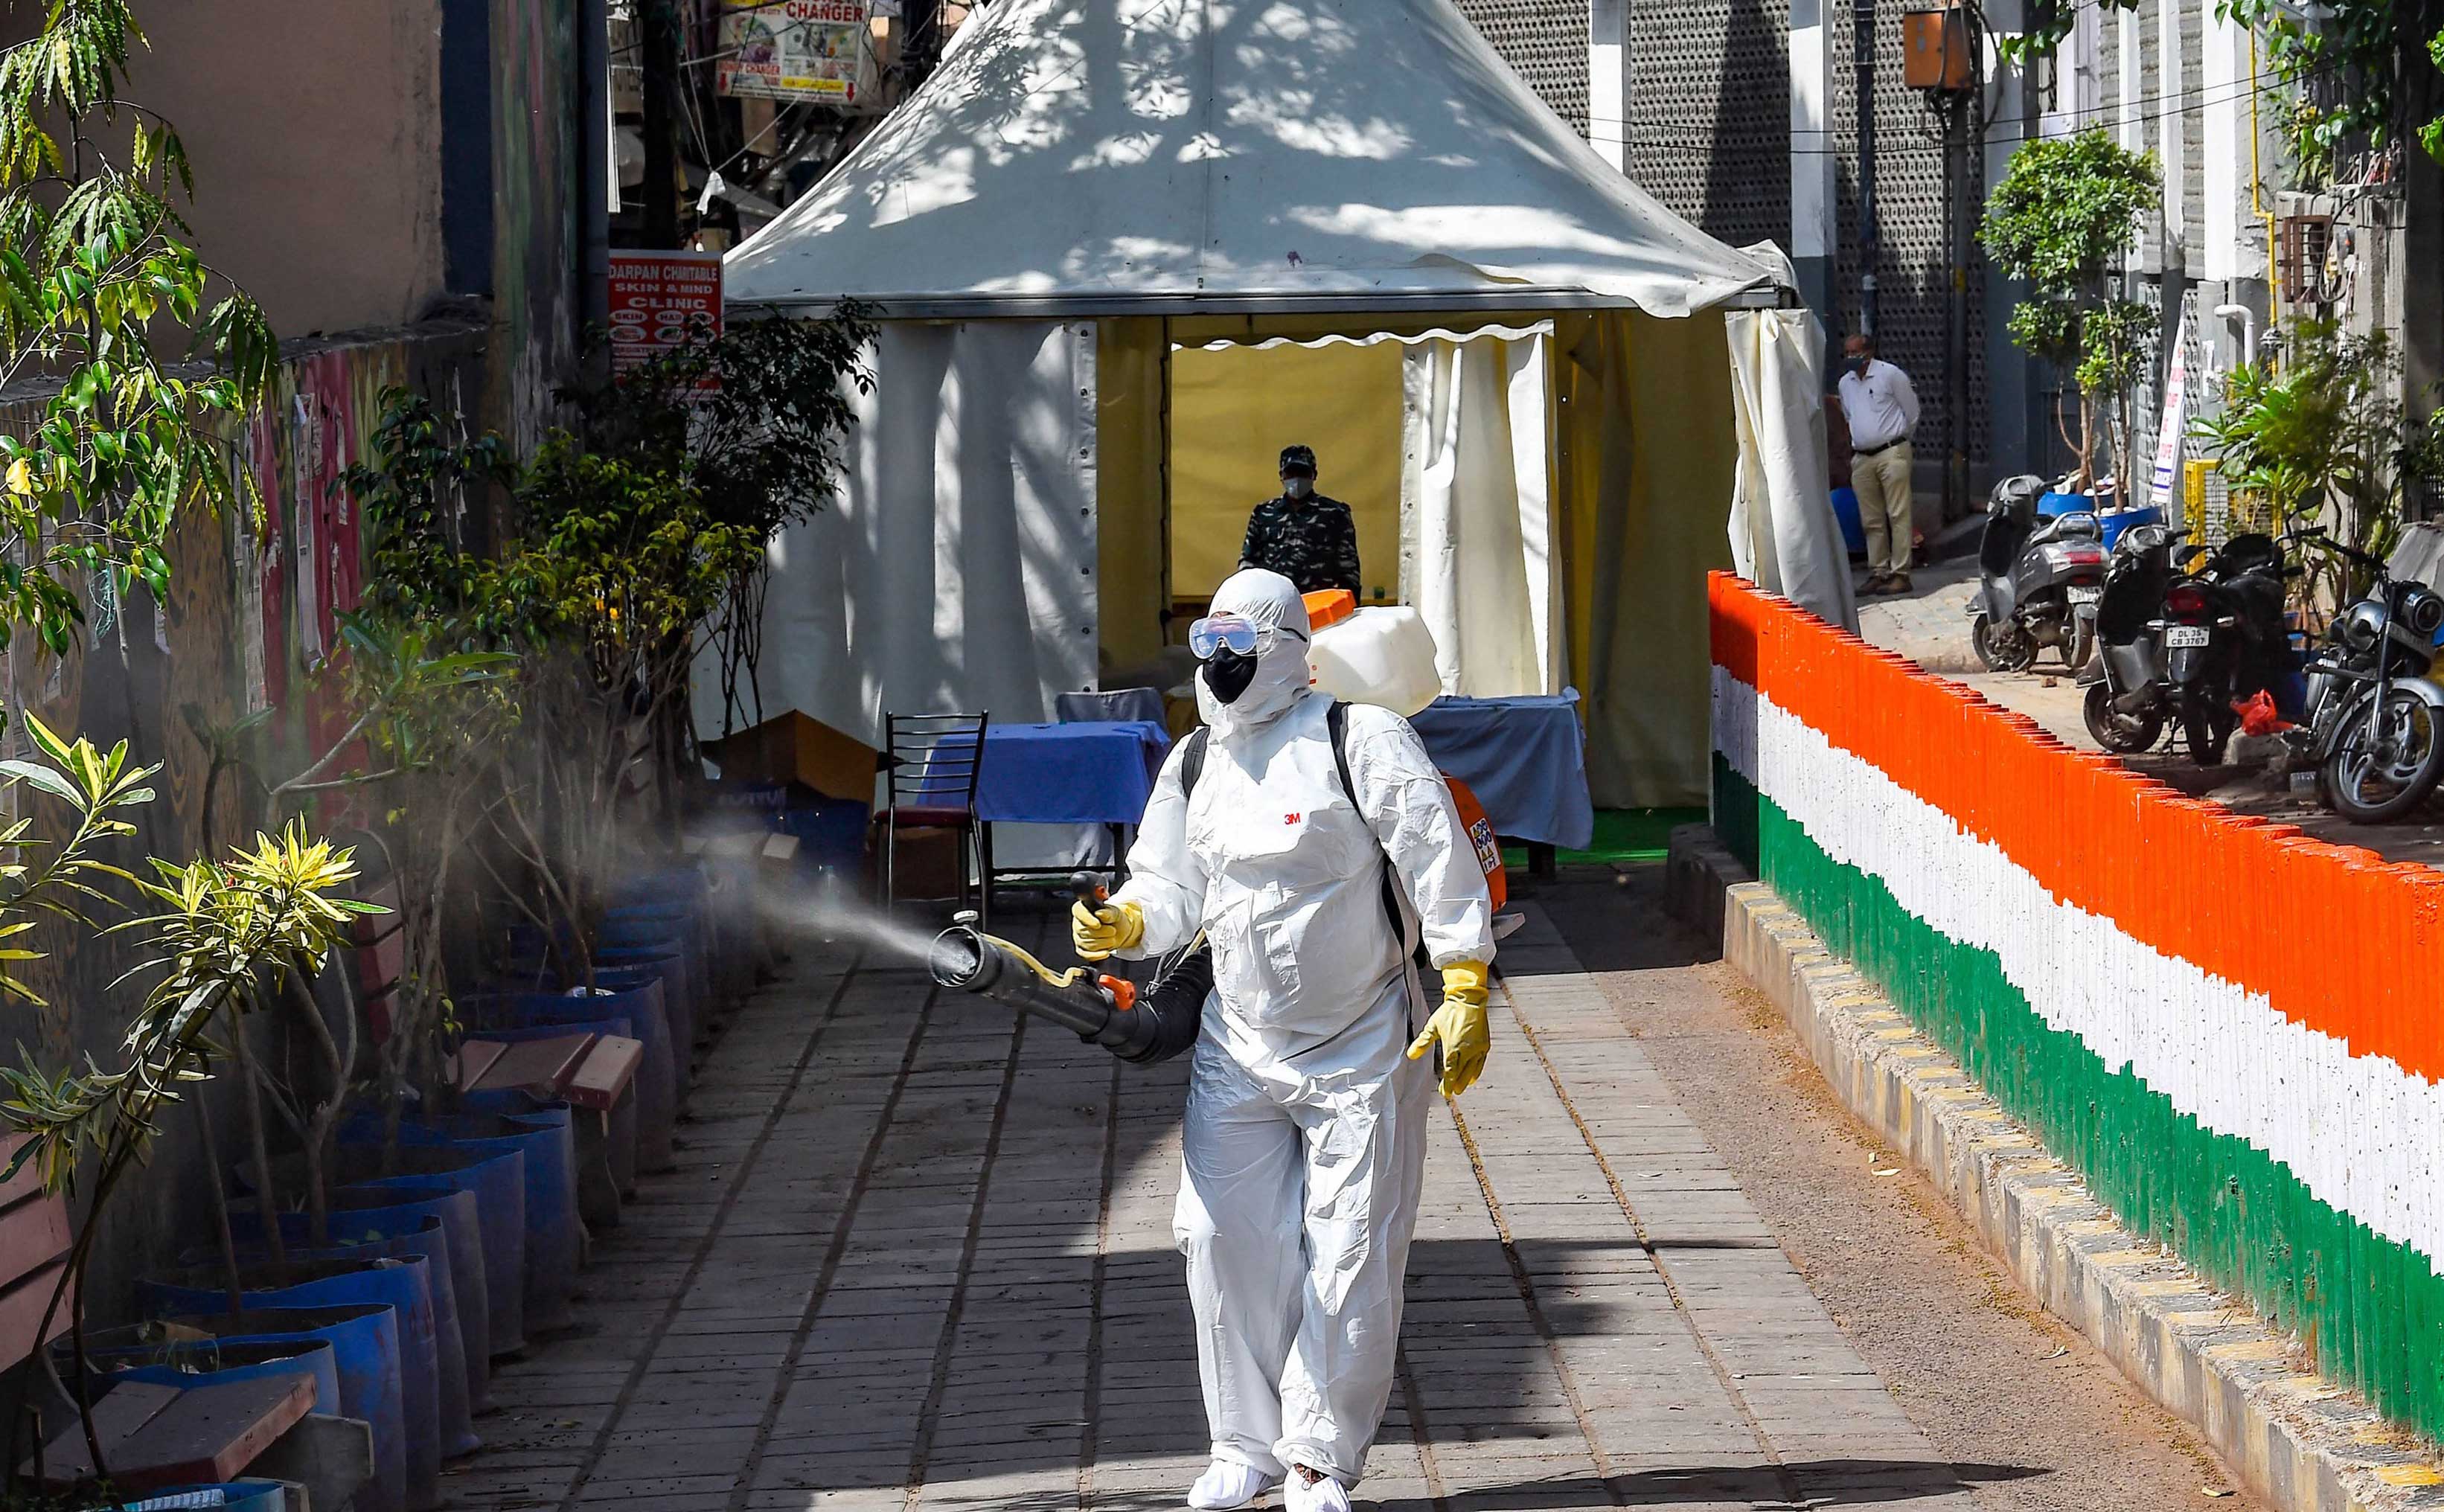 A health worker sanitises an area near Nizamuddin mosque, after people who attended the religious congregation at Tabligh Jamaats, tested postive for COVID-19